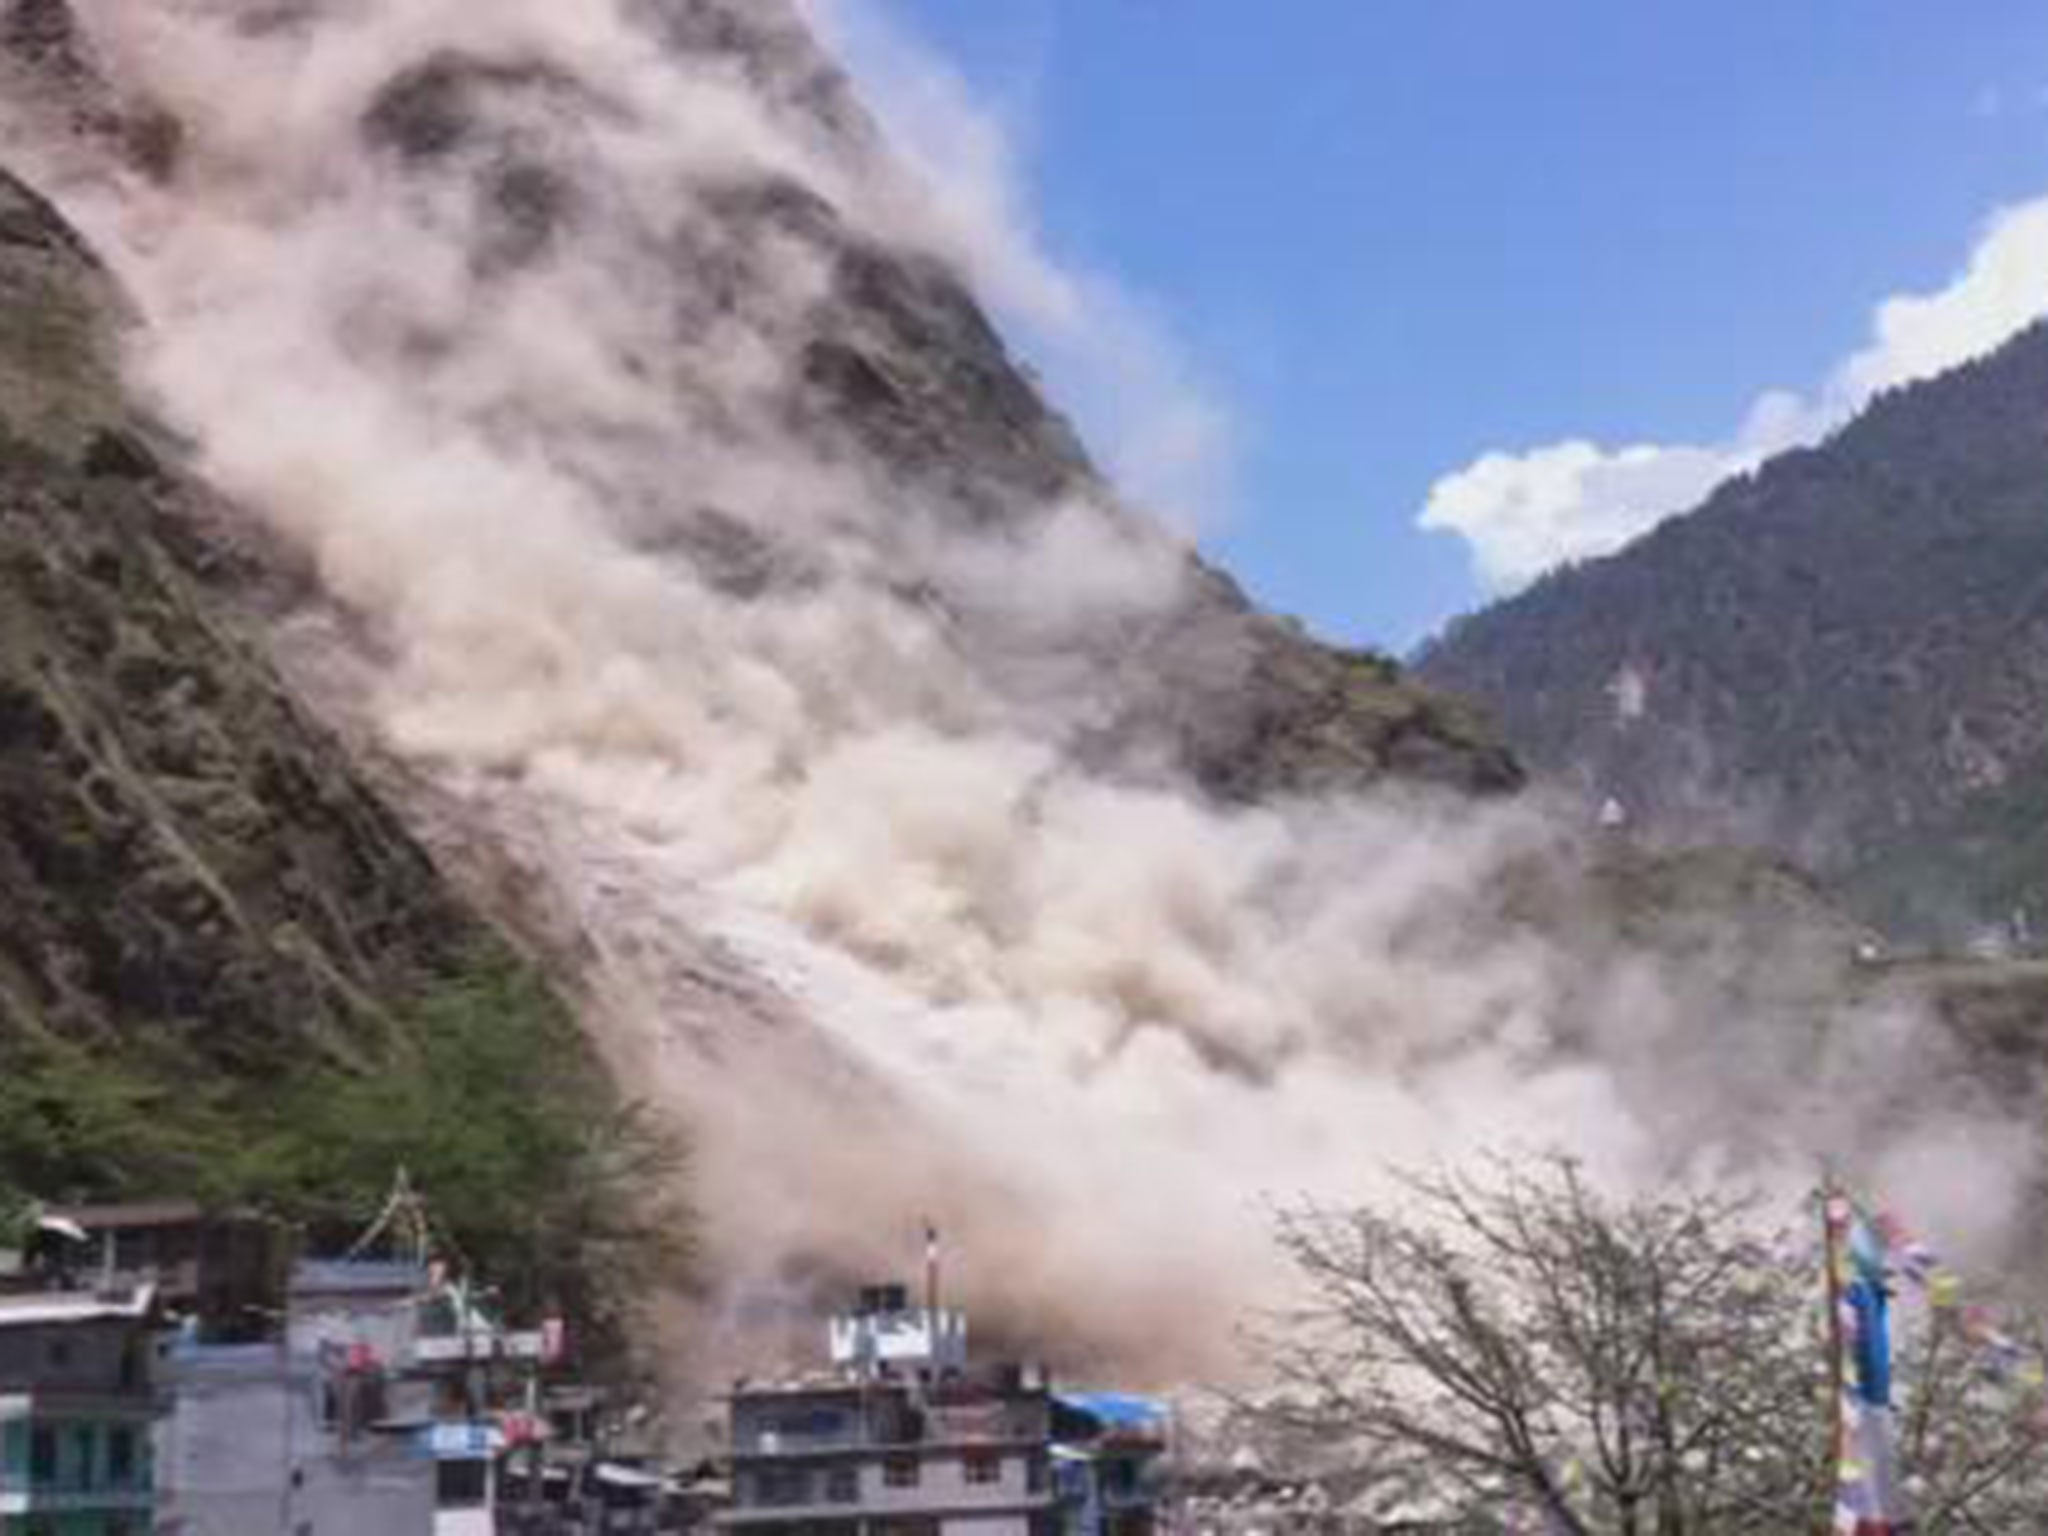 Massive landslide hits the area near the town of Dhunche